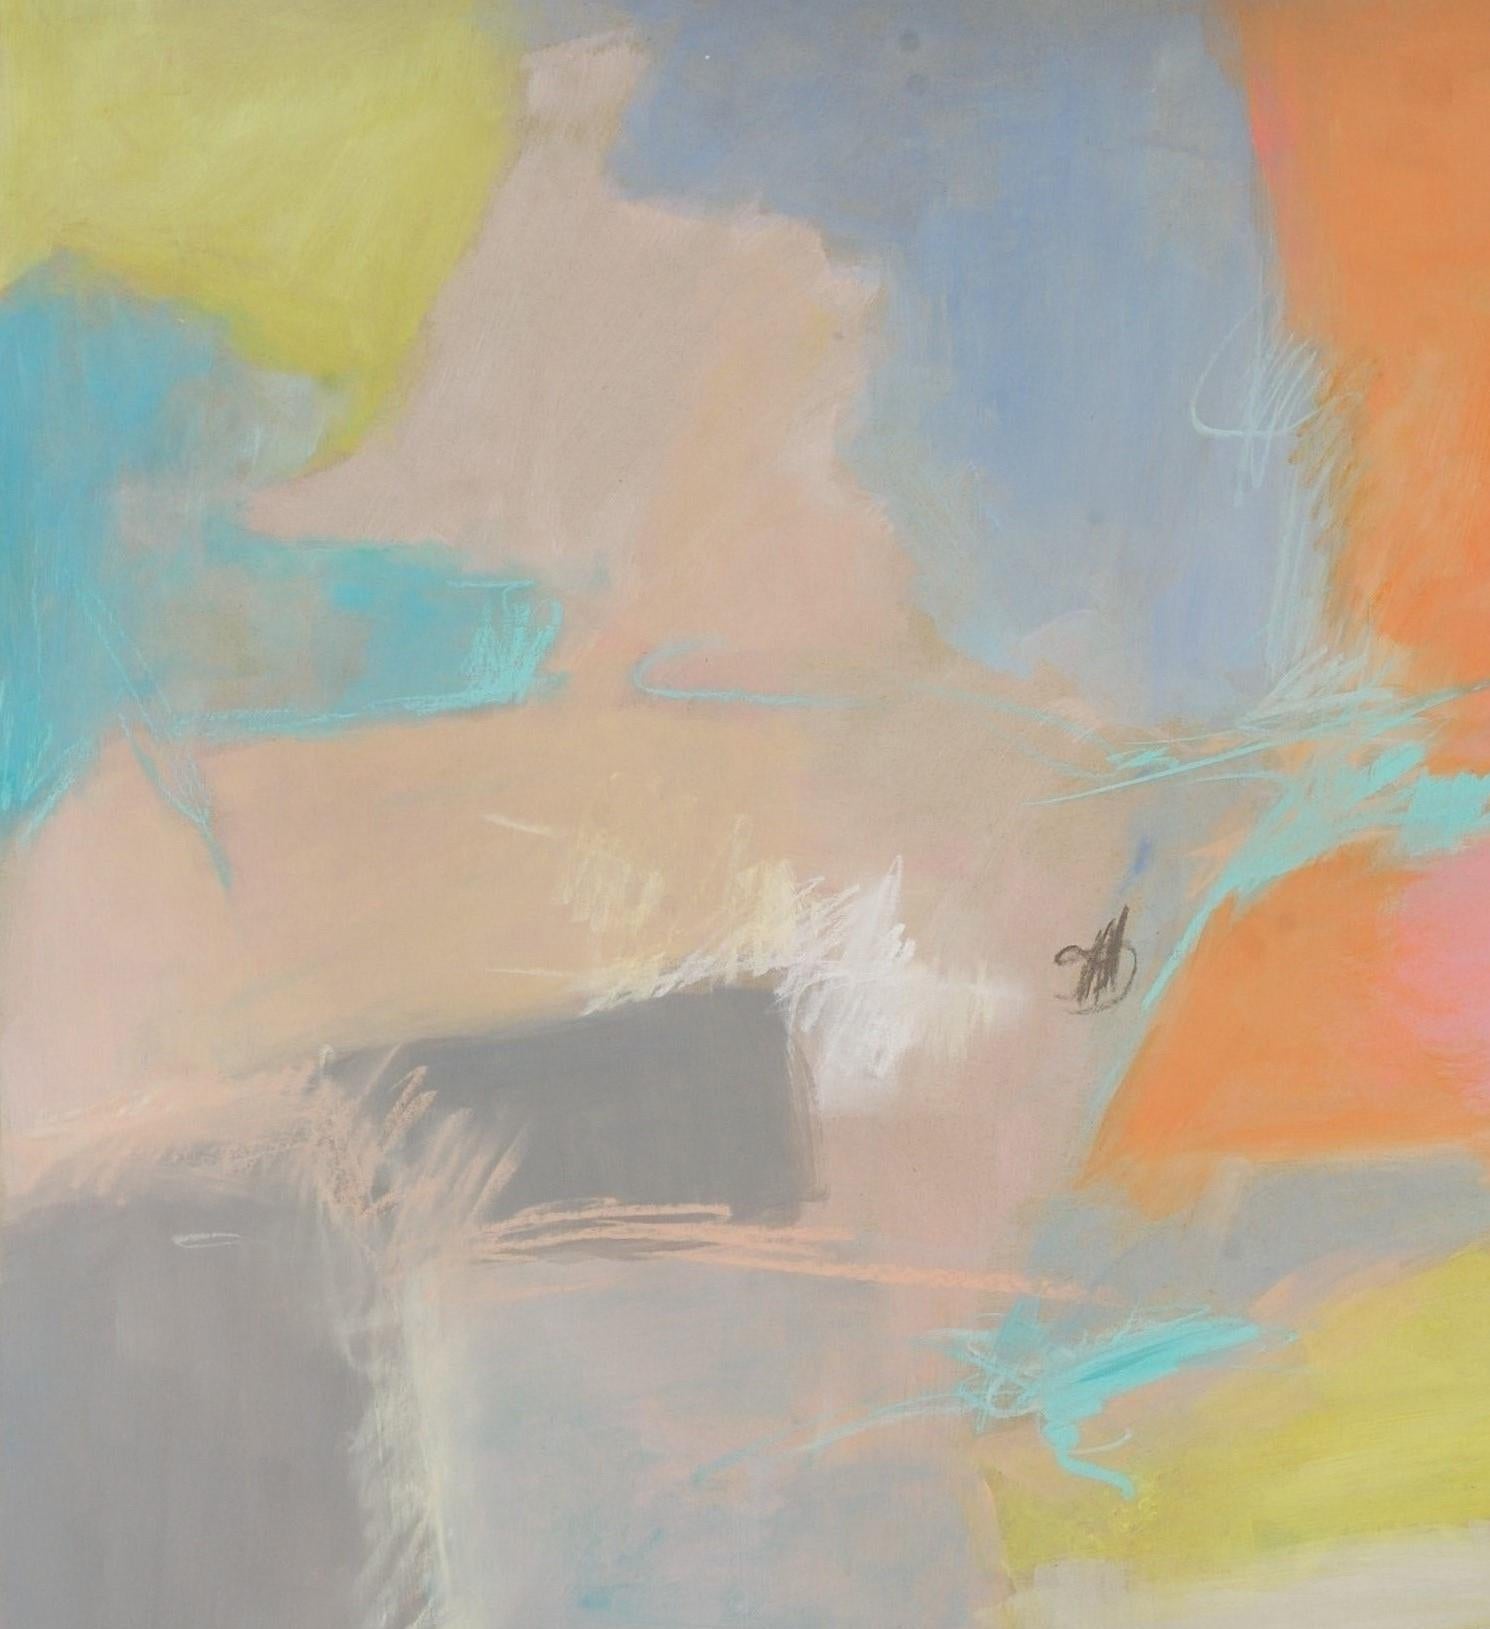 This original painting on paper by Deborah Brisker Burke is signed on the back by the artist. It is unframed. The abstract composition has shades of blush, blue, yellow, orange, grey and pink through out the piece.   

Debbie Brisker Burk's process